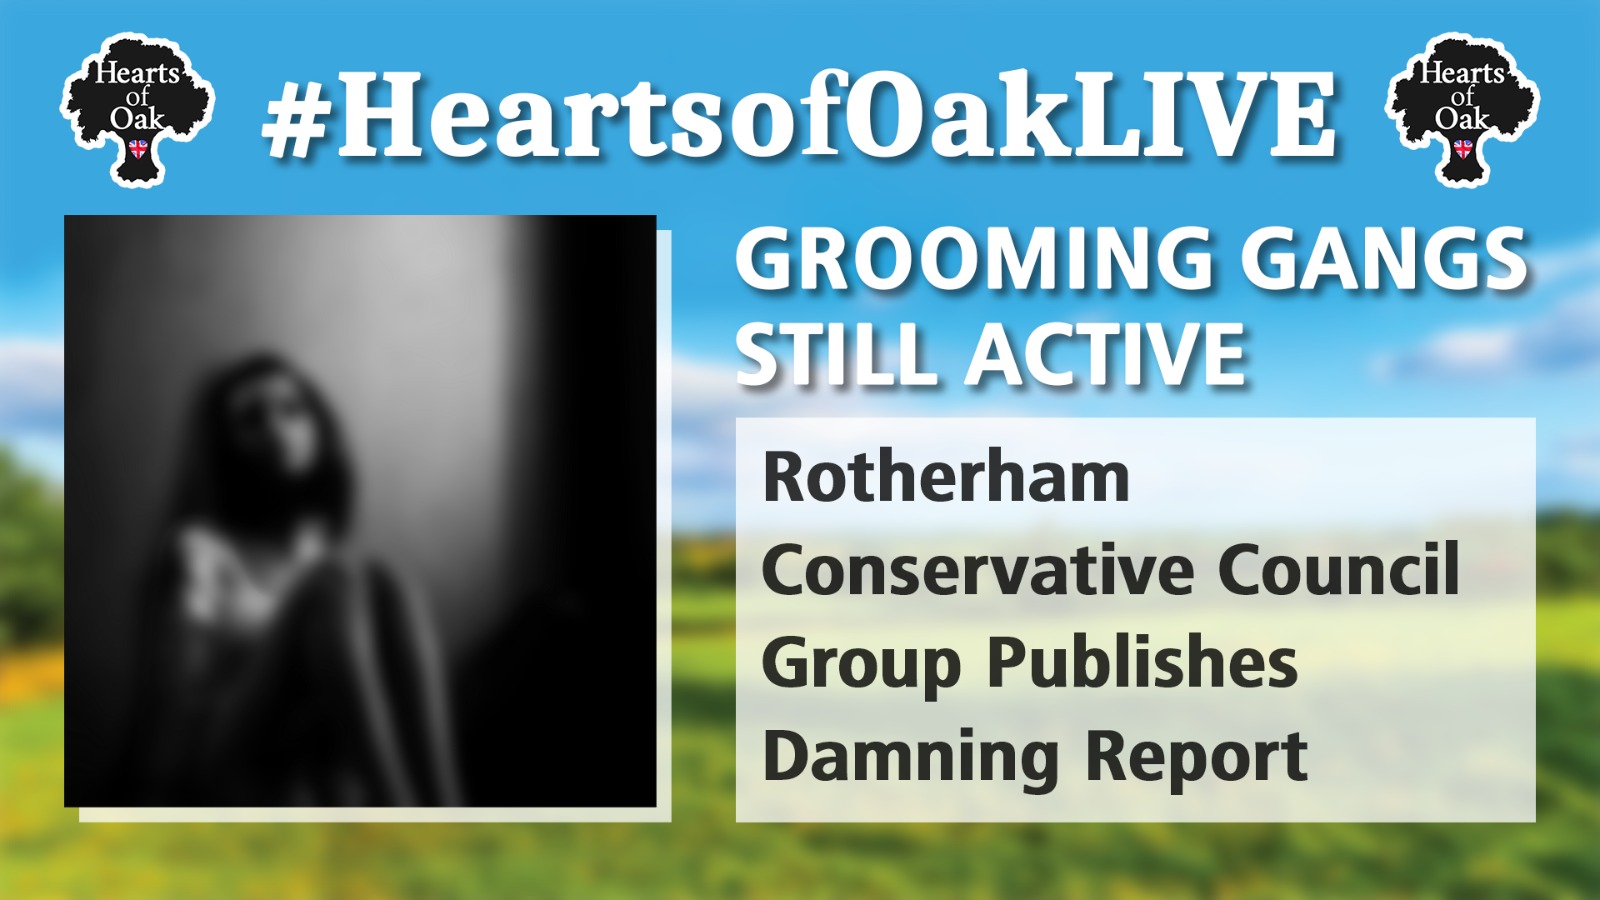 Grooming Gangs Still Active: Rotherham Conservative Council Group Publishes Grooming Report